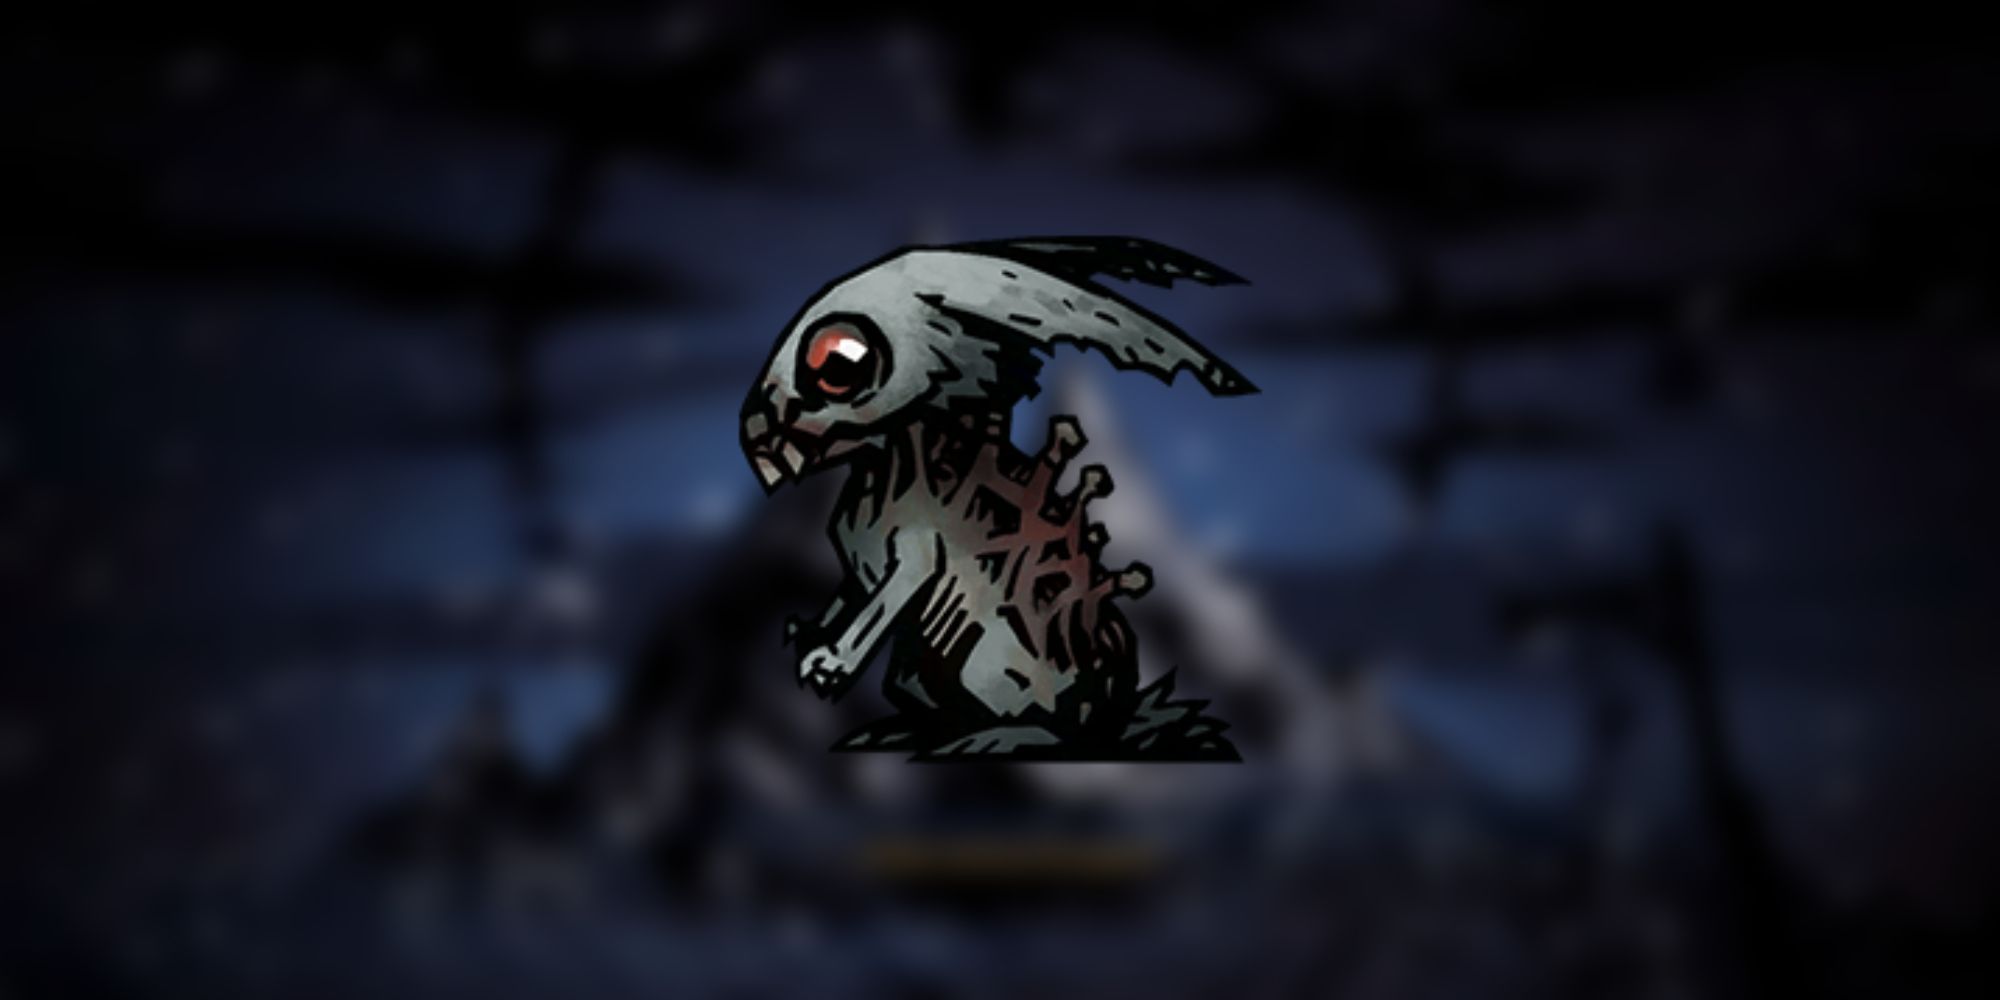 An image of the Reanimated Rabbit Pet from Darkest Dungeon 2